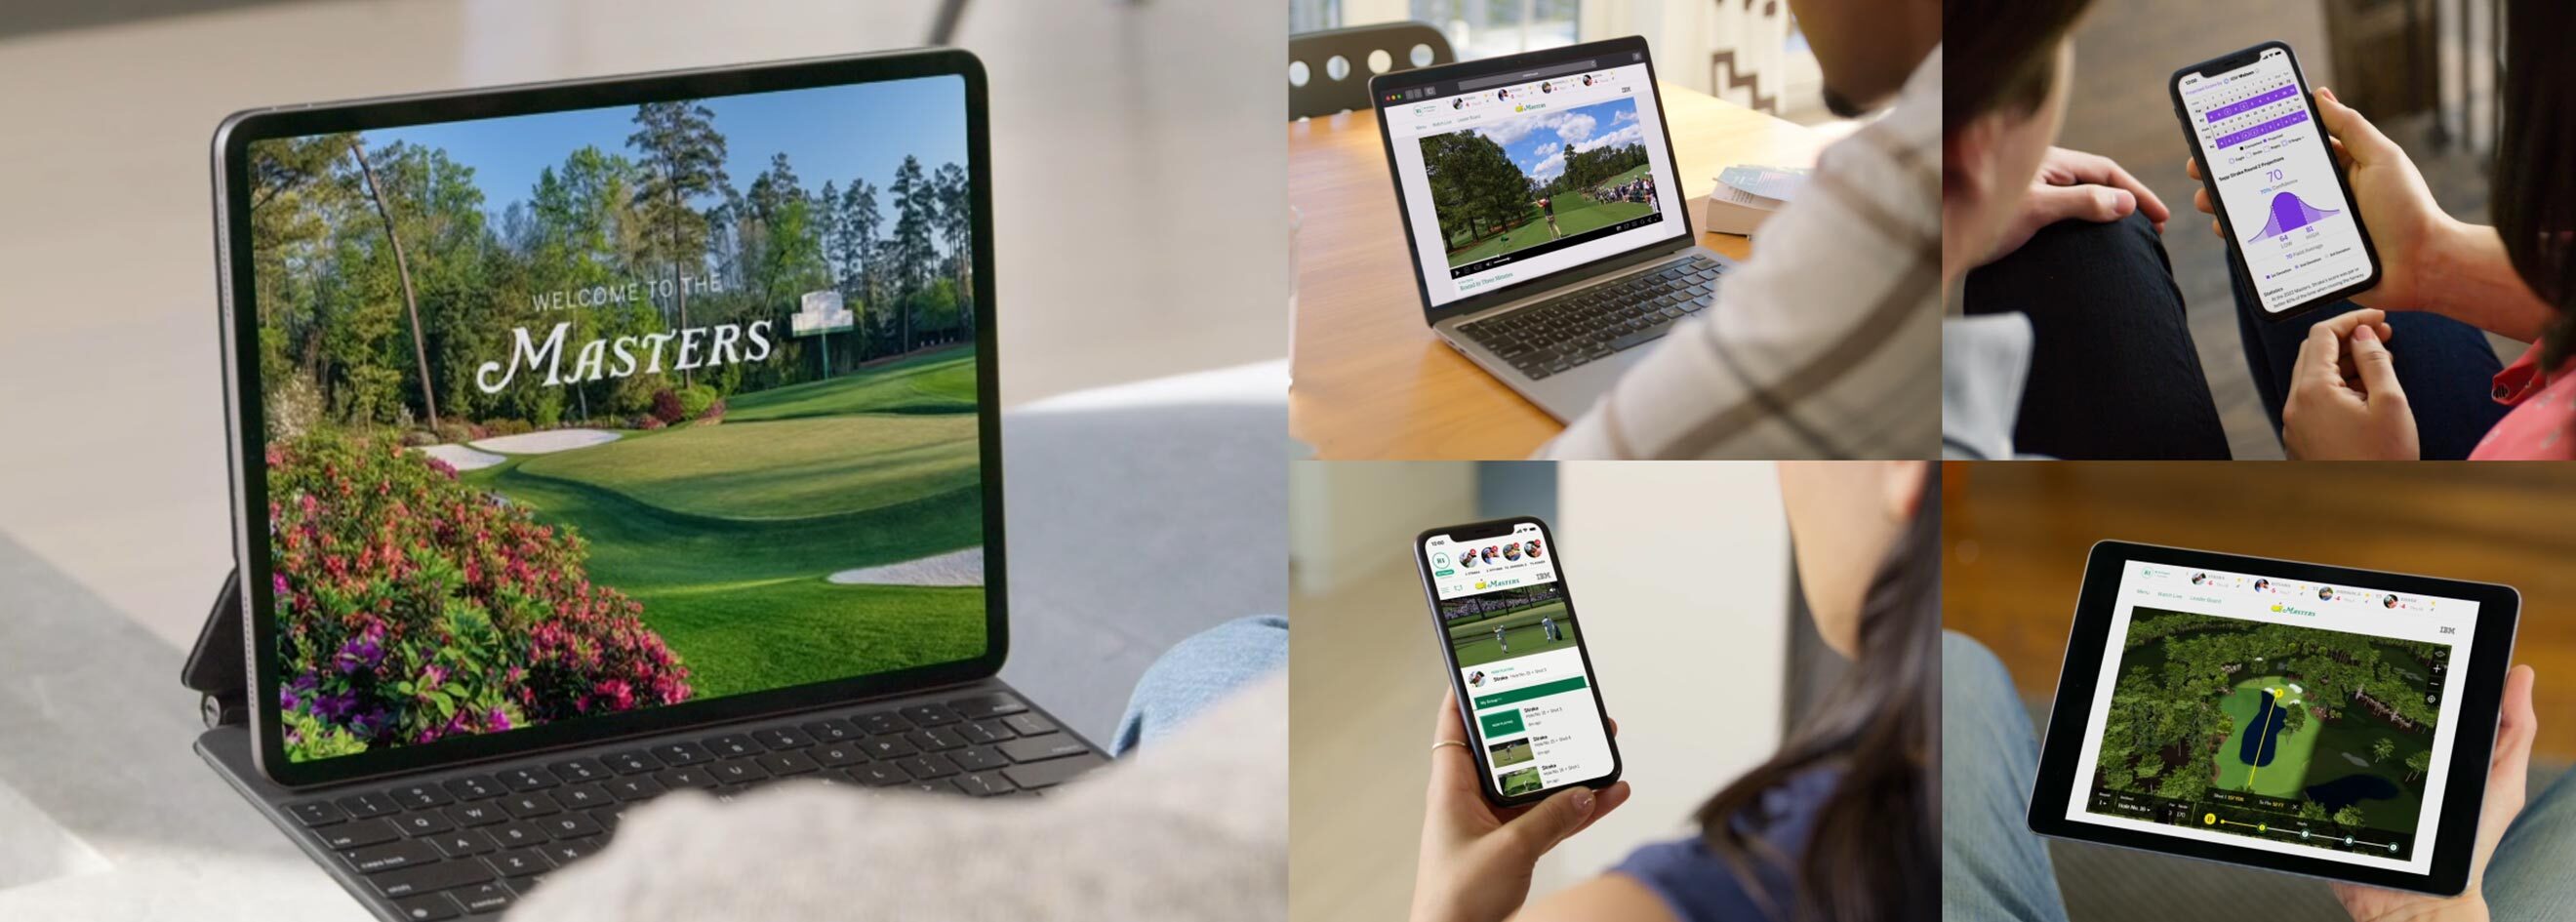 A collection of screenshots from the Masters App.